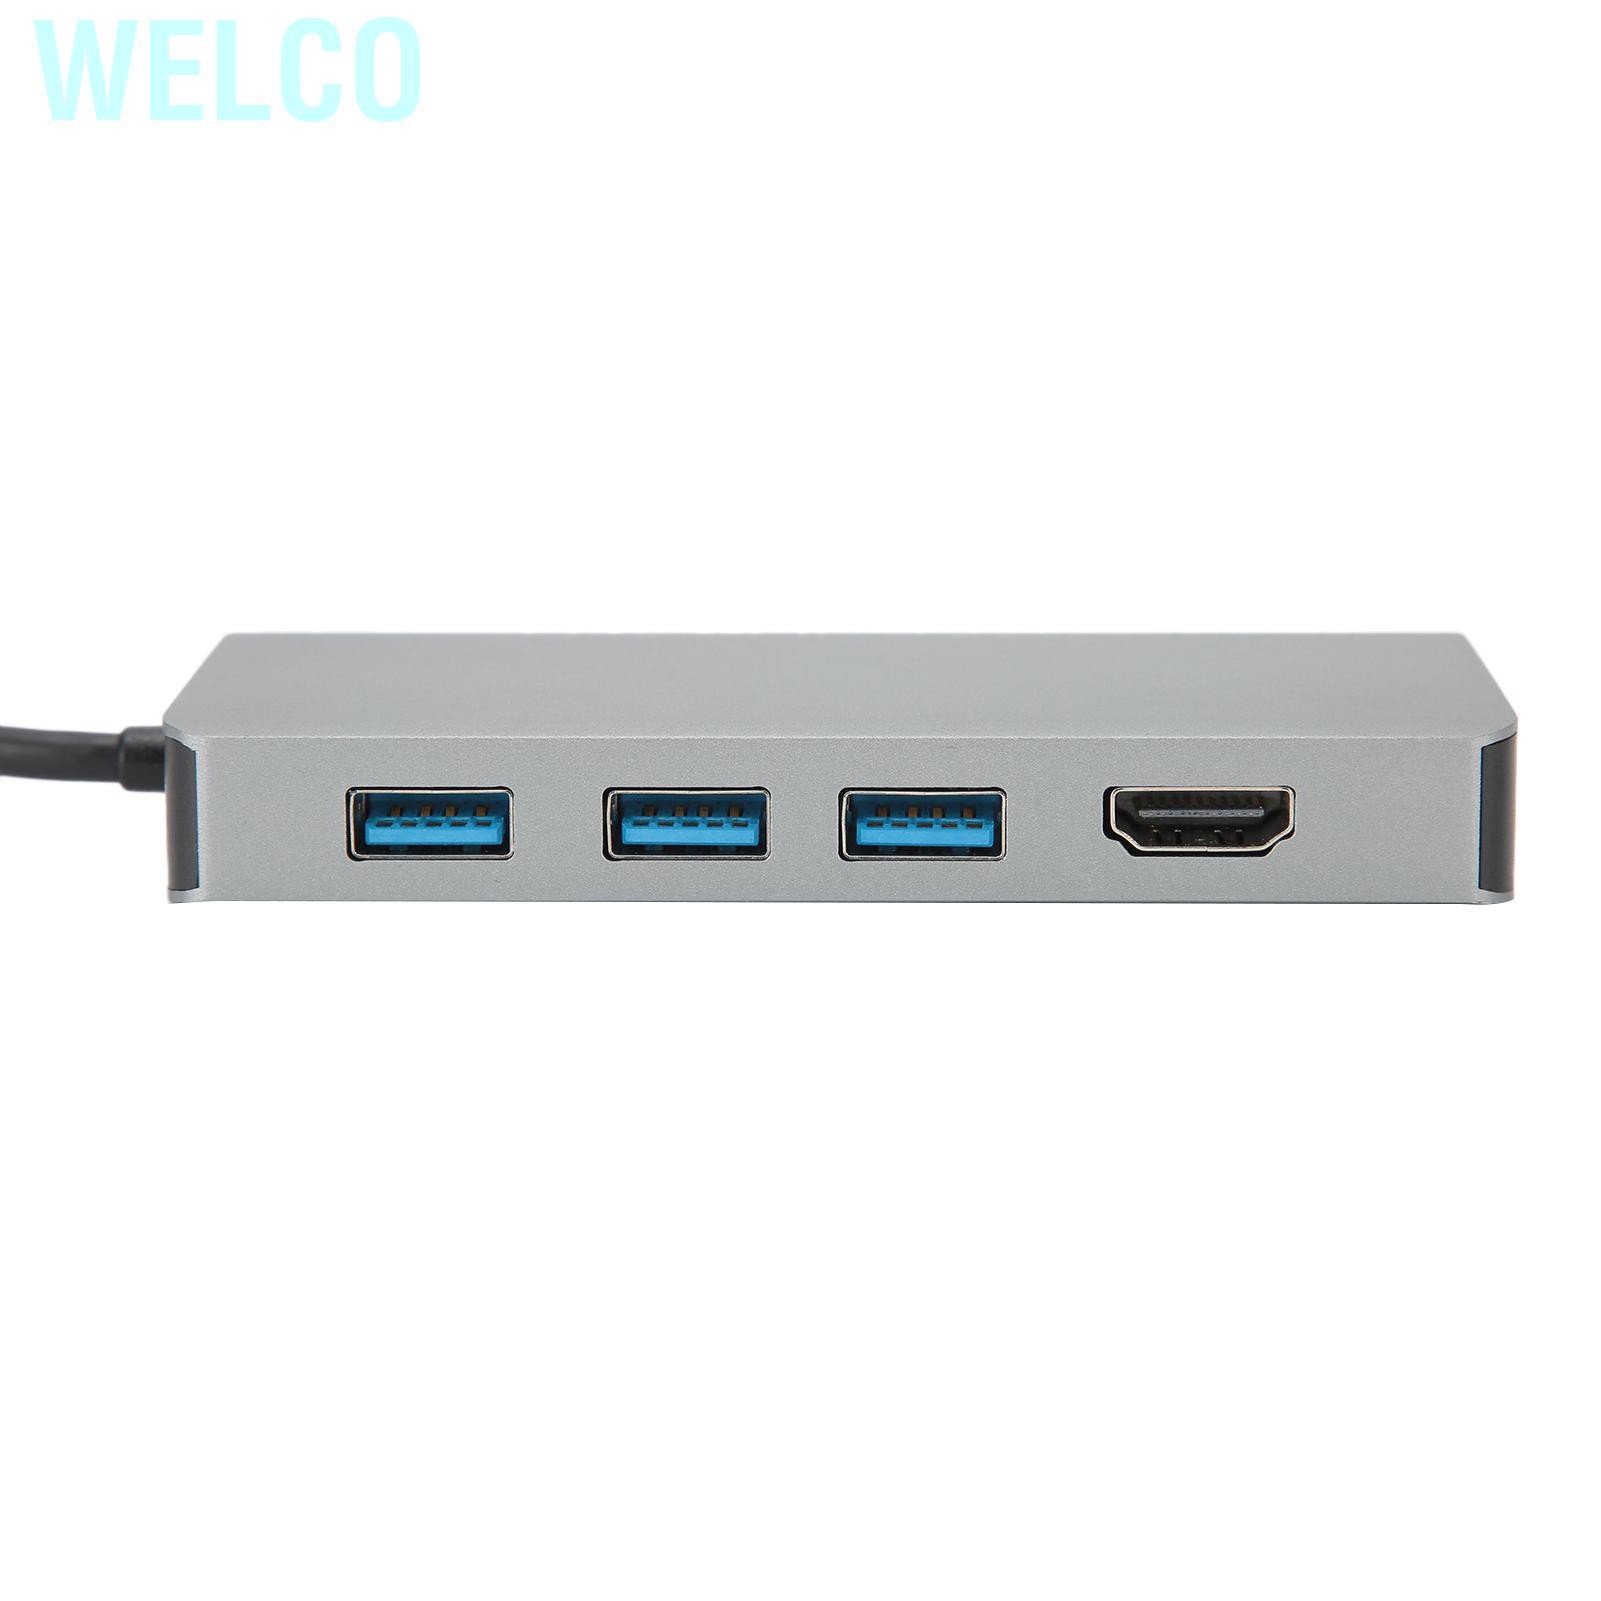 Welco Hub Adapter  Type‑C to HDMI Cable VGA Converter USB Plug and Play for Laptop Computer Business Presentations Conferences Training Courses